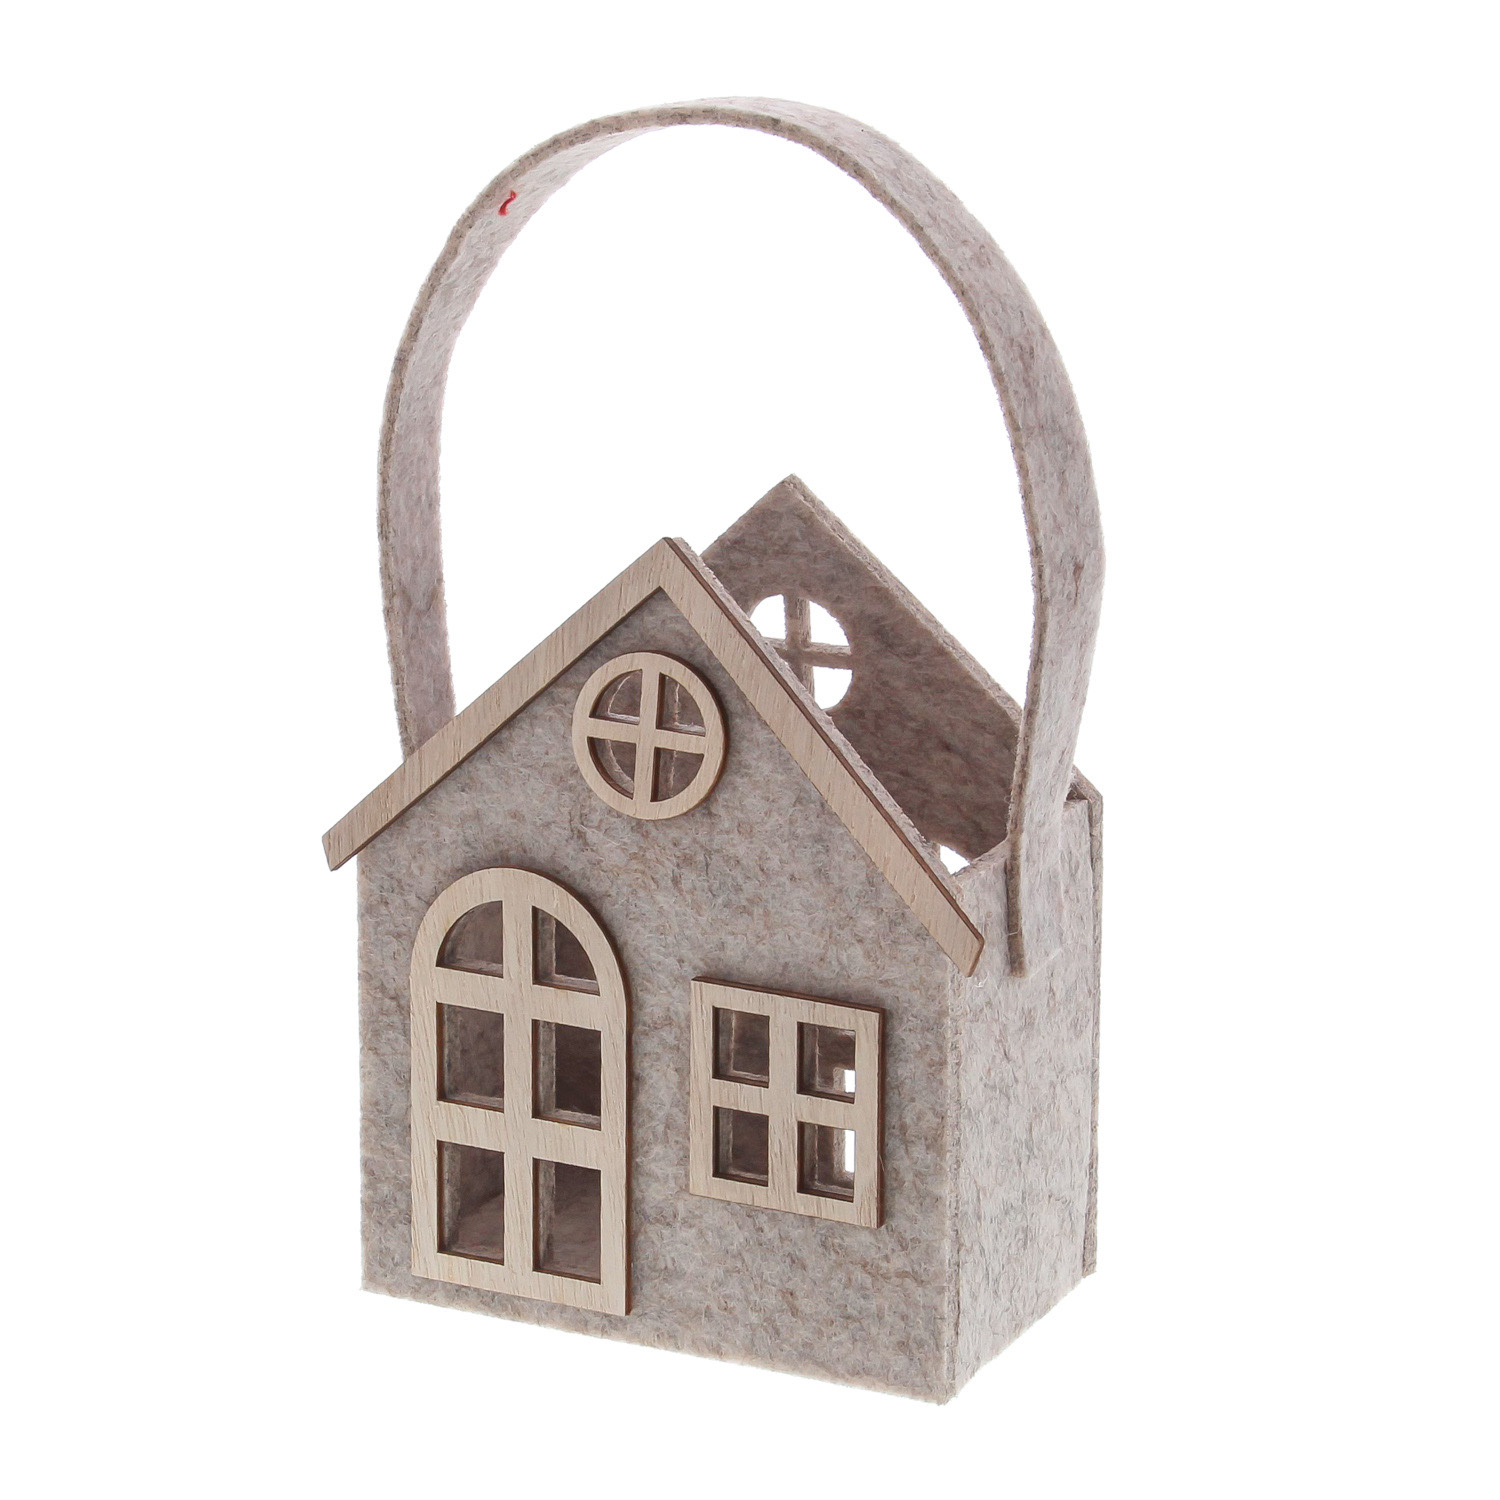 Felt house basket with handle beige / wood finish - 140*80*240mm - 6 pieces